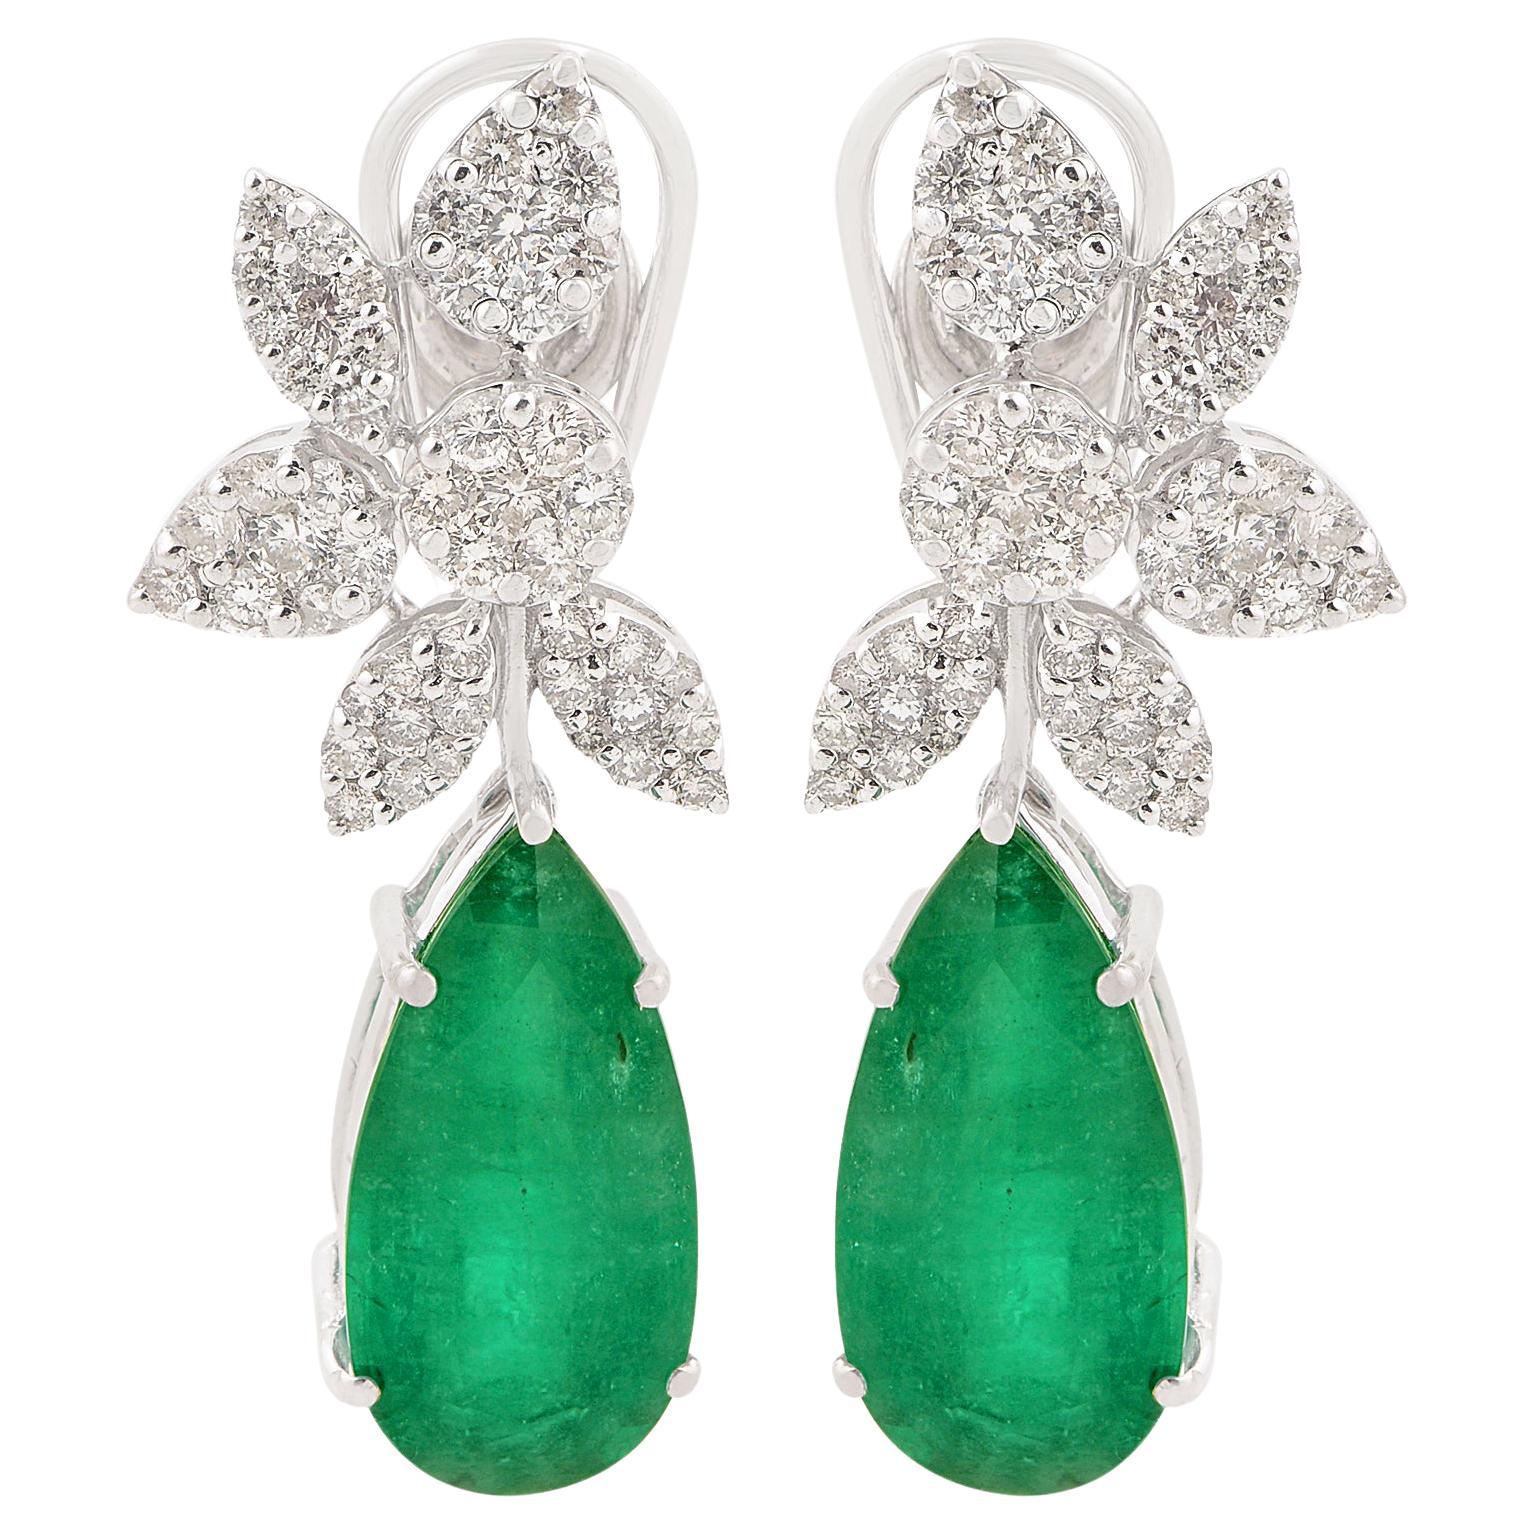 Pear Natural Emerald Gemstone Leaf Earrings Diamond Pave 18k White Gold Jewelry